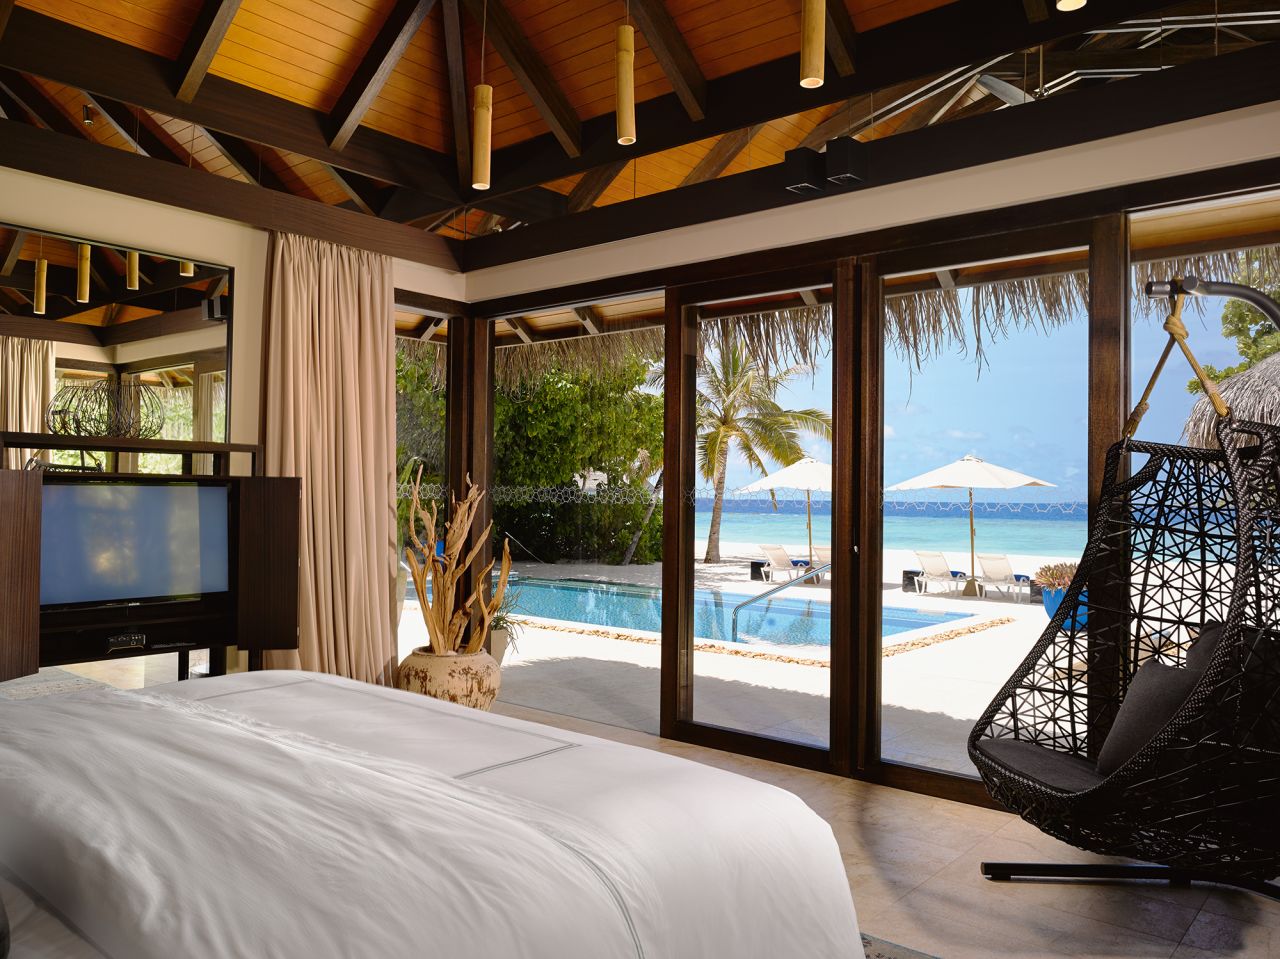 Velaa Private Island offers world-class golf and plenty of relaxation.